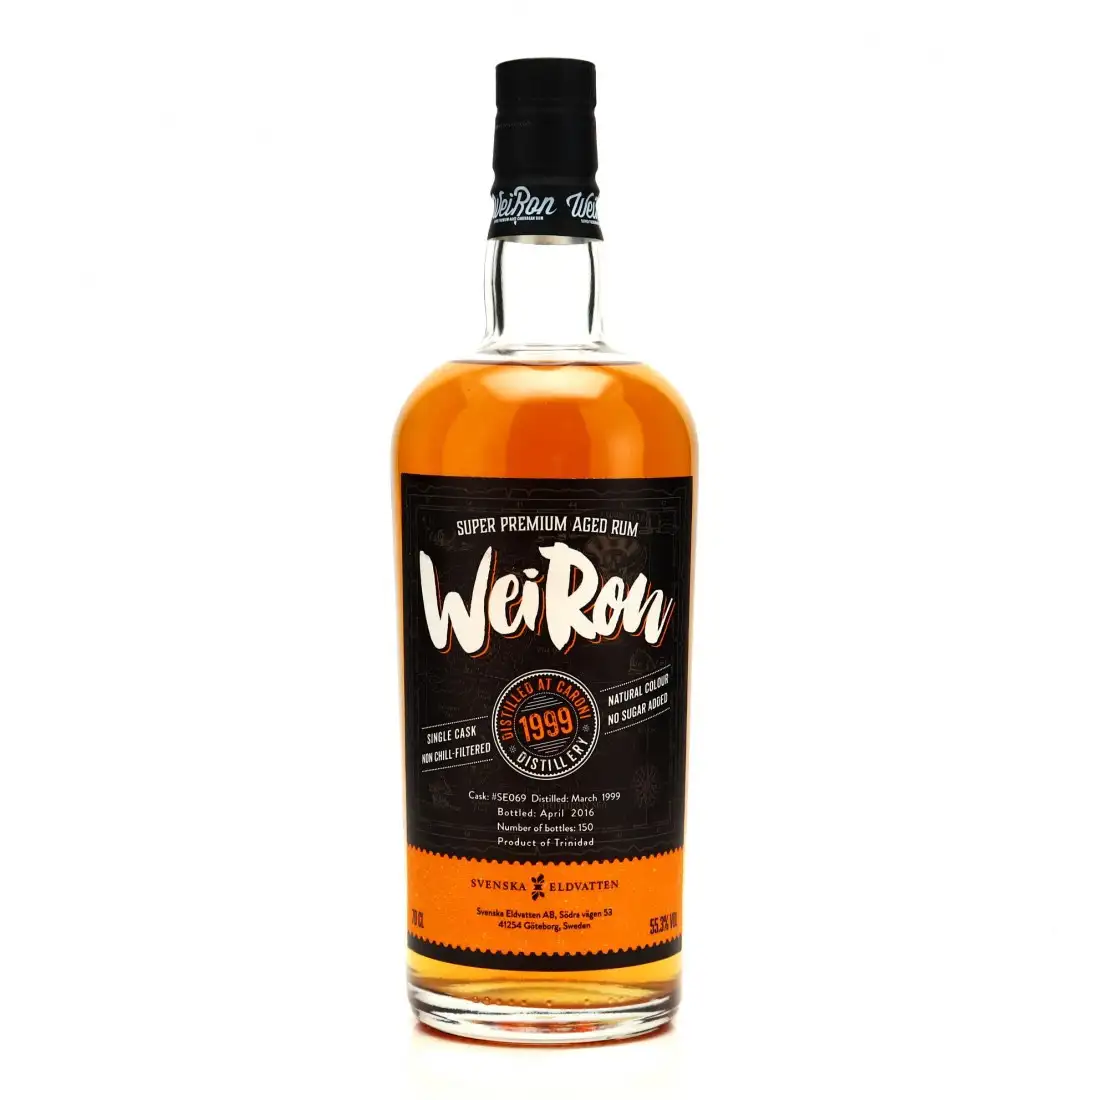 Image of the front of the bottle of the rum Weiron